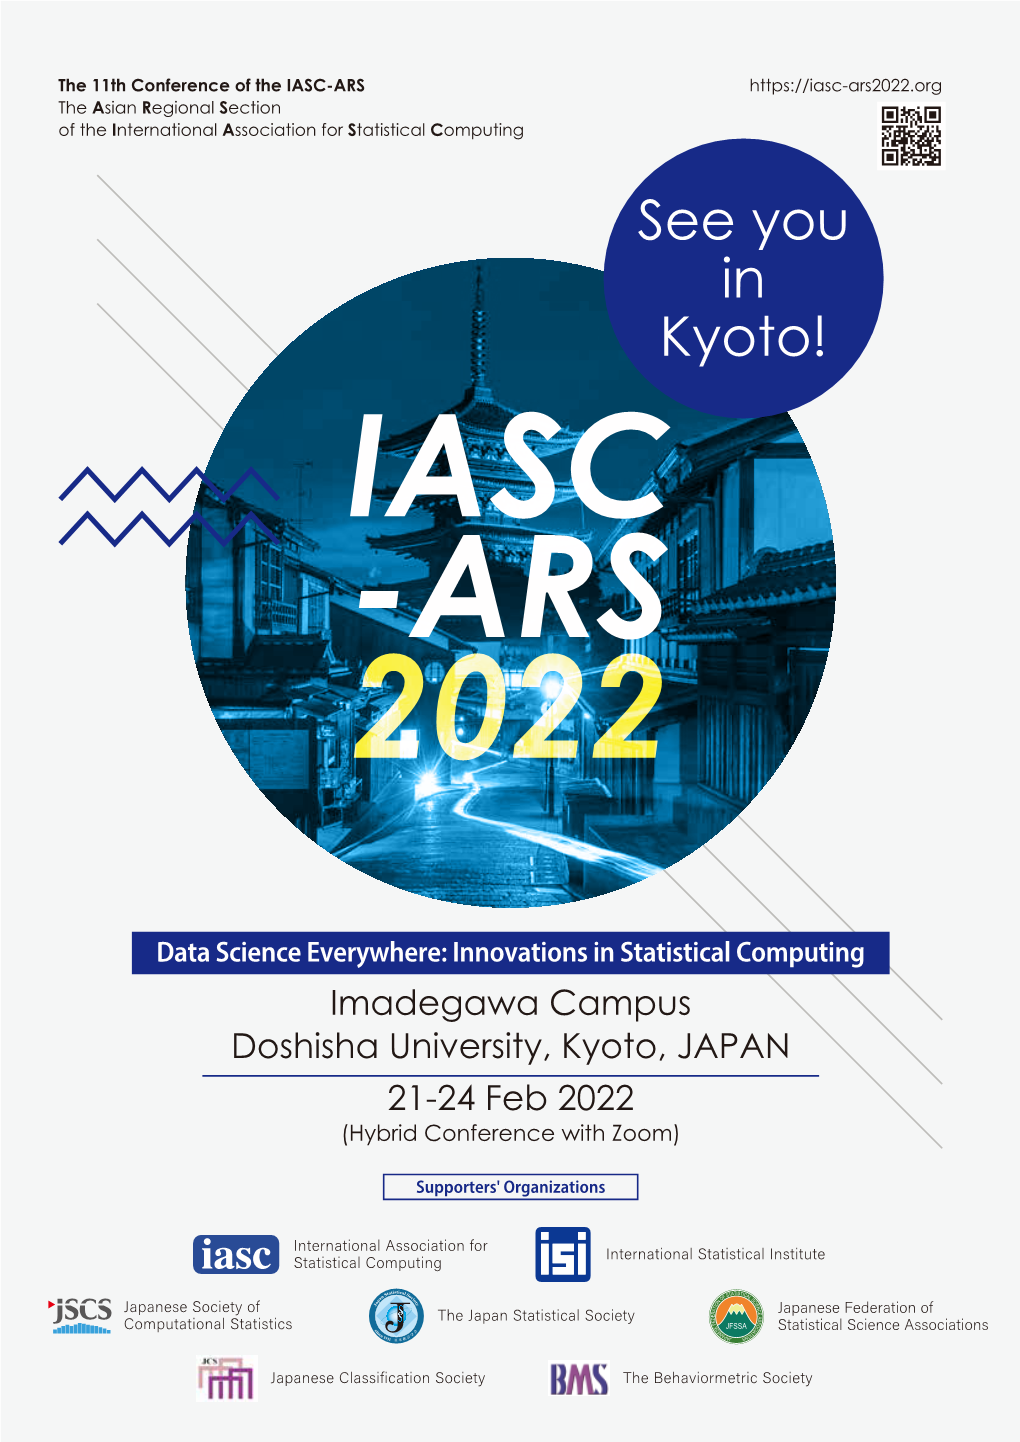 See You in Kyoto! IASC -ARS 2022